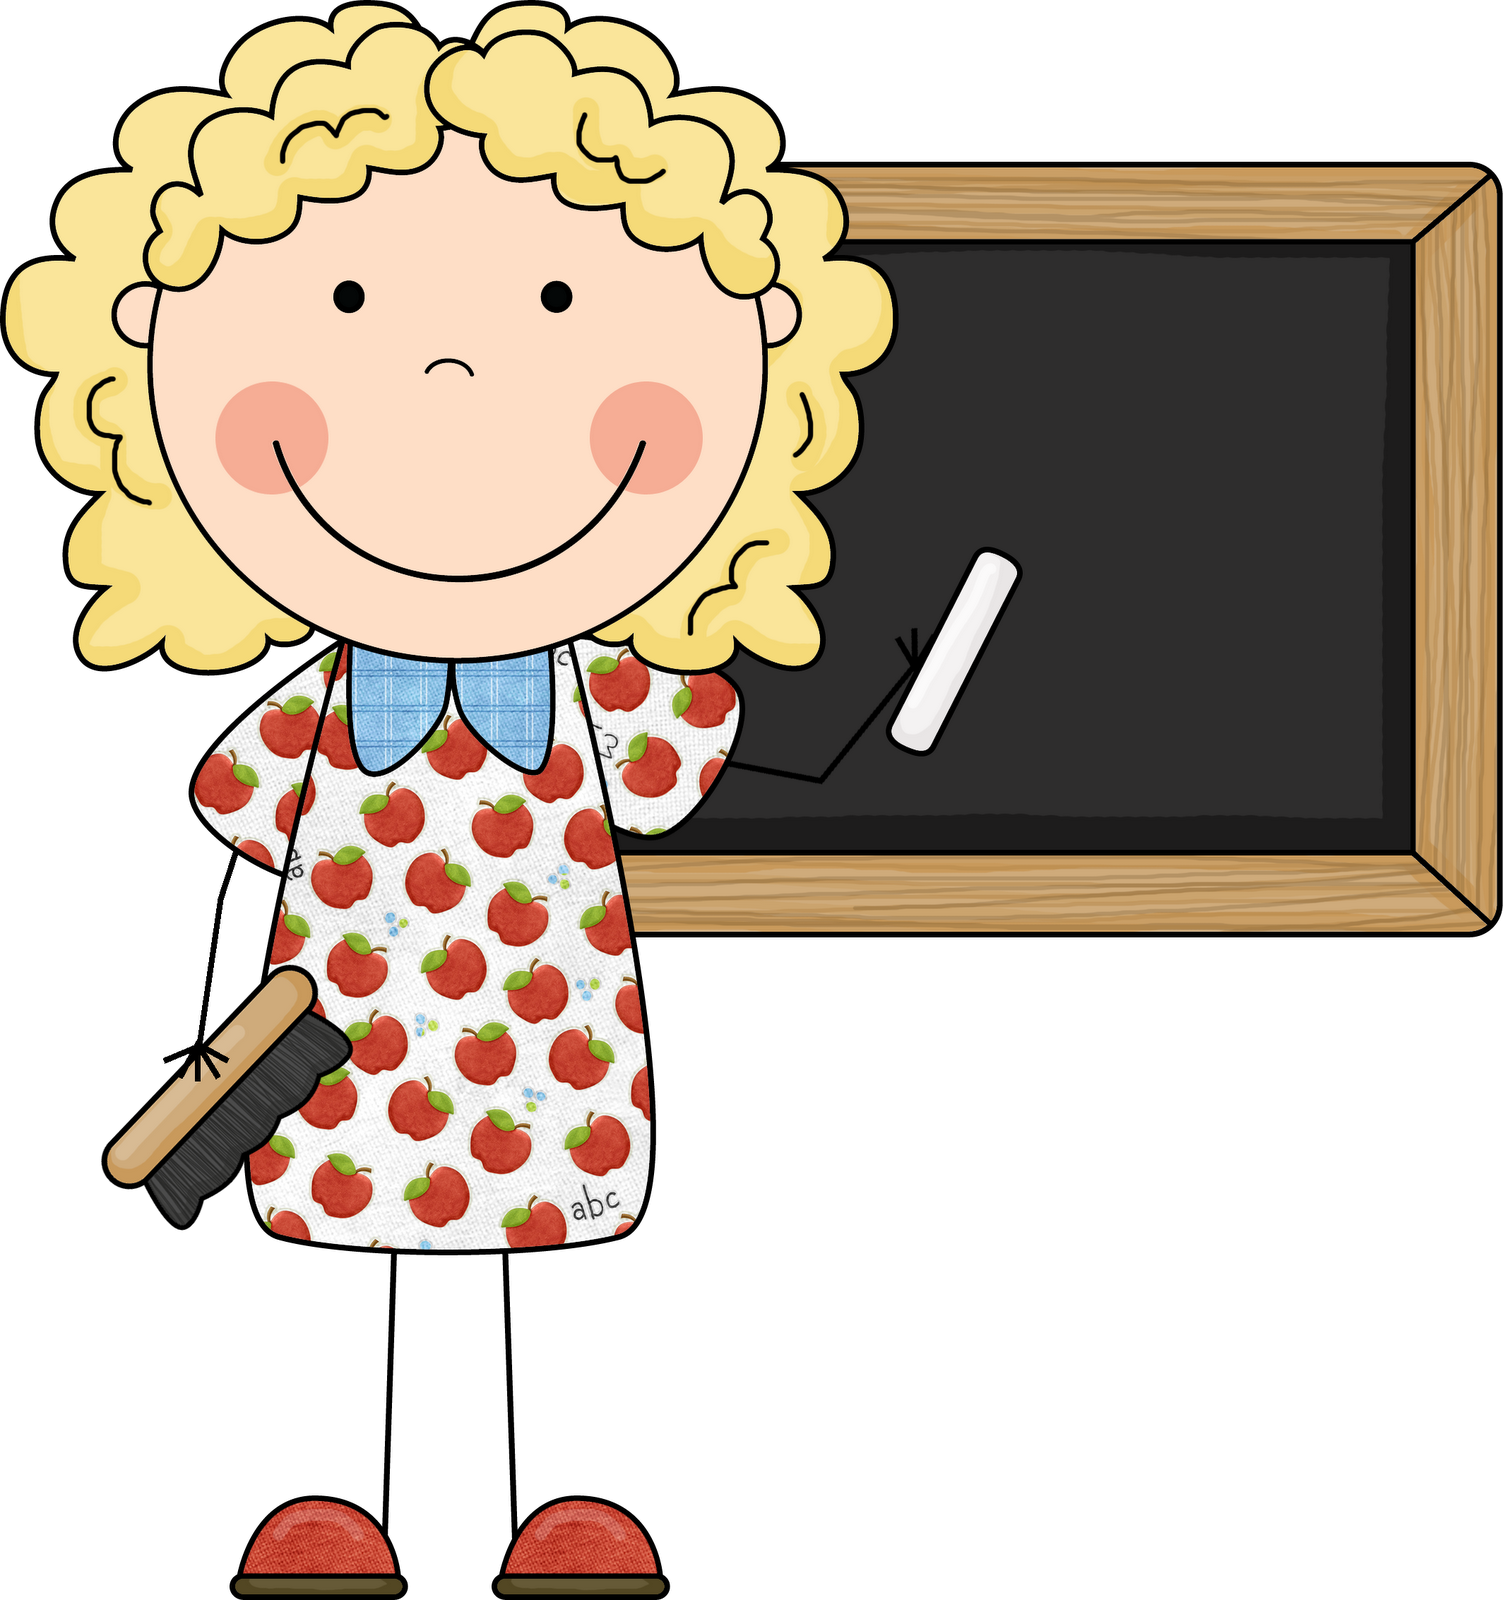 81 Images Of Cute Teacher Clip Art You Can Use These Free Cliparts